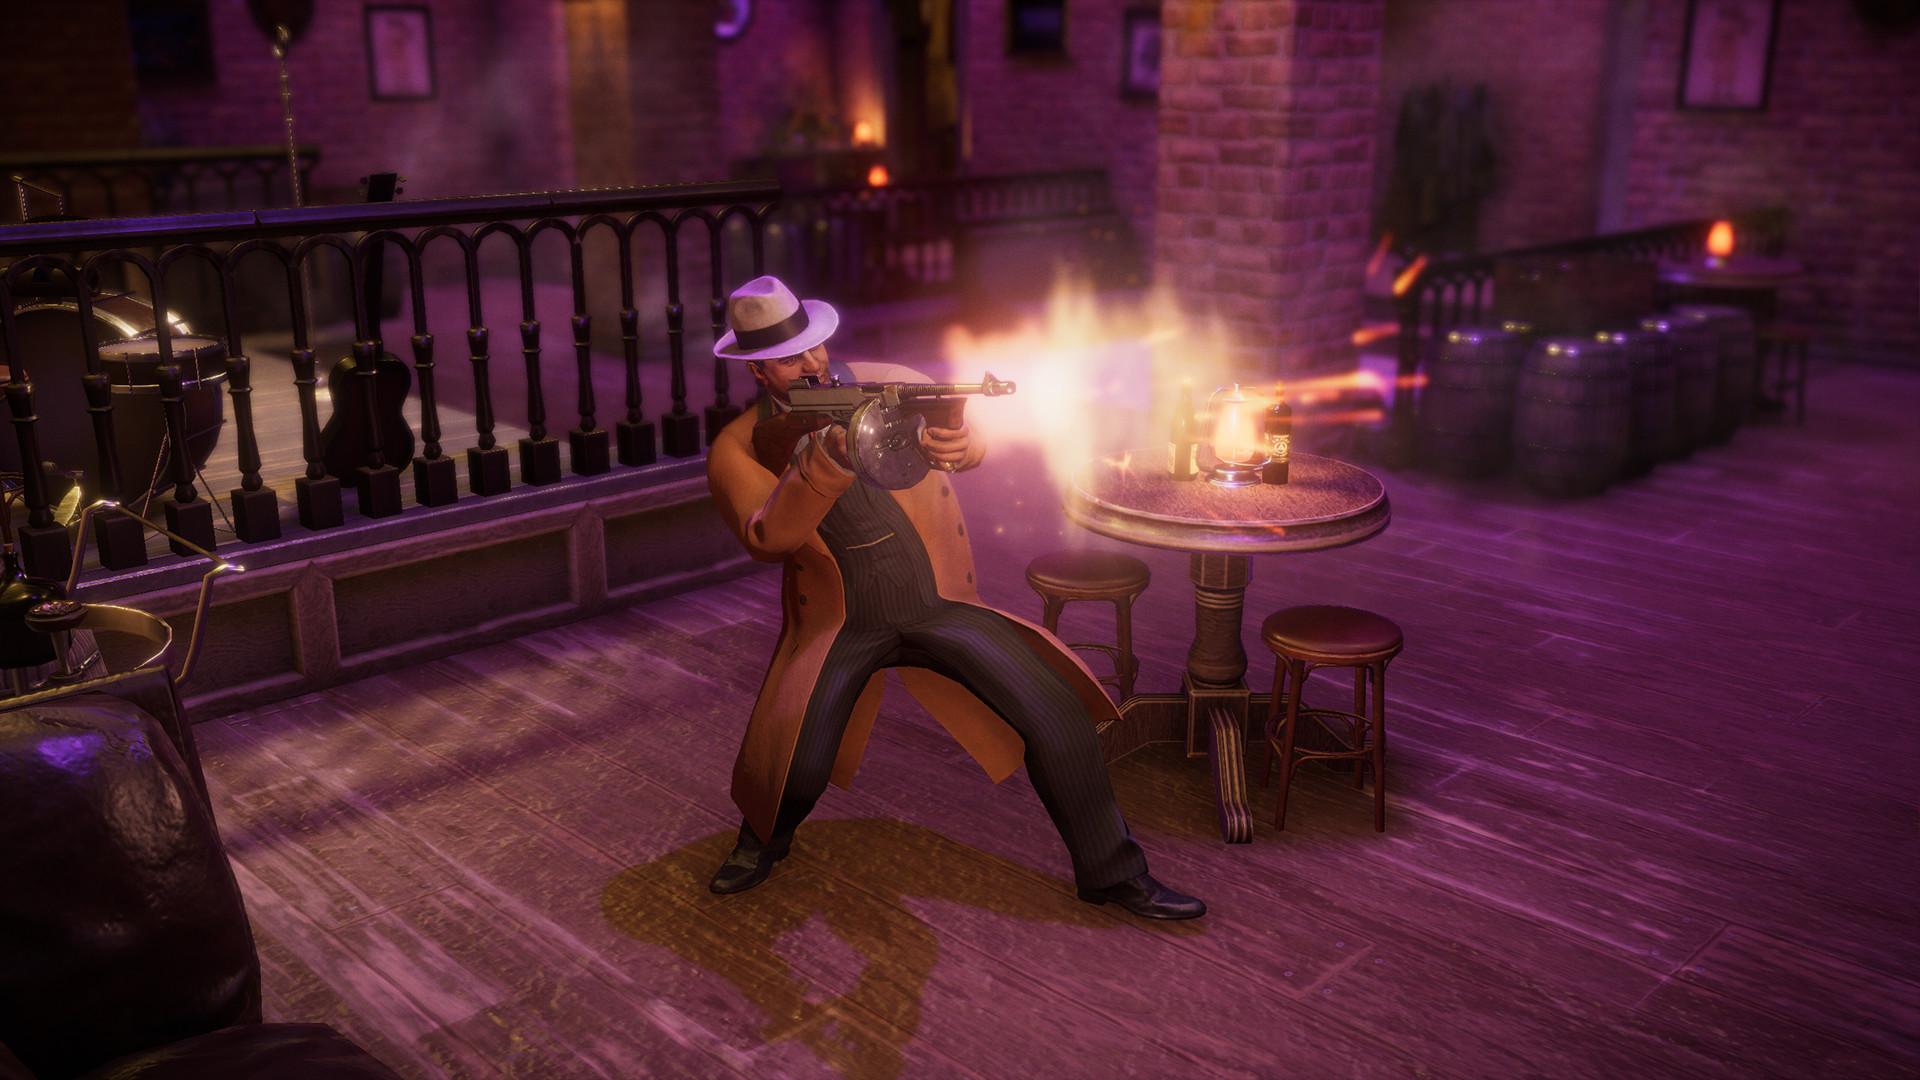 Screenshot №3 from game Empire of Sin